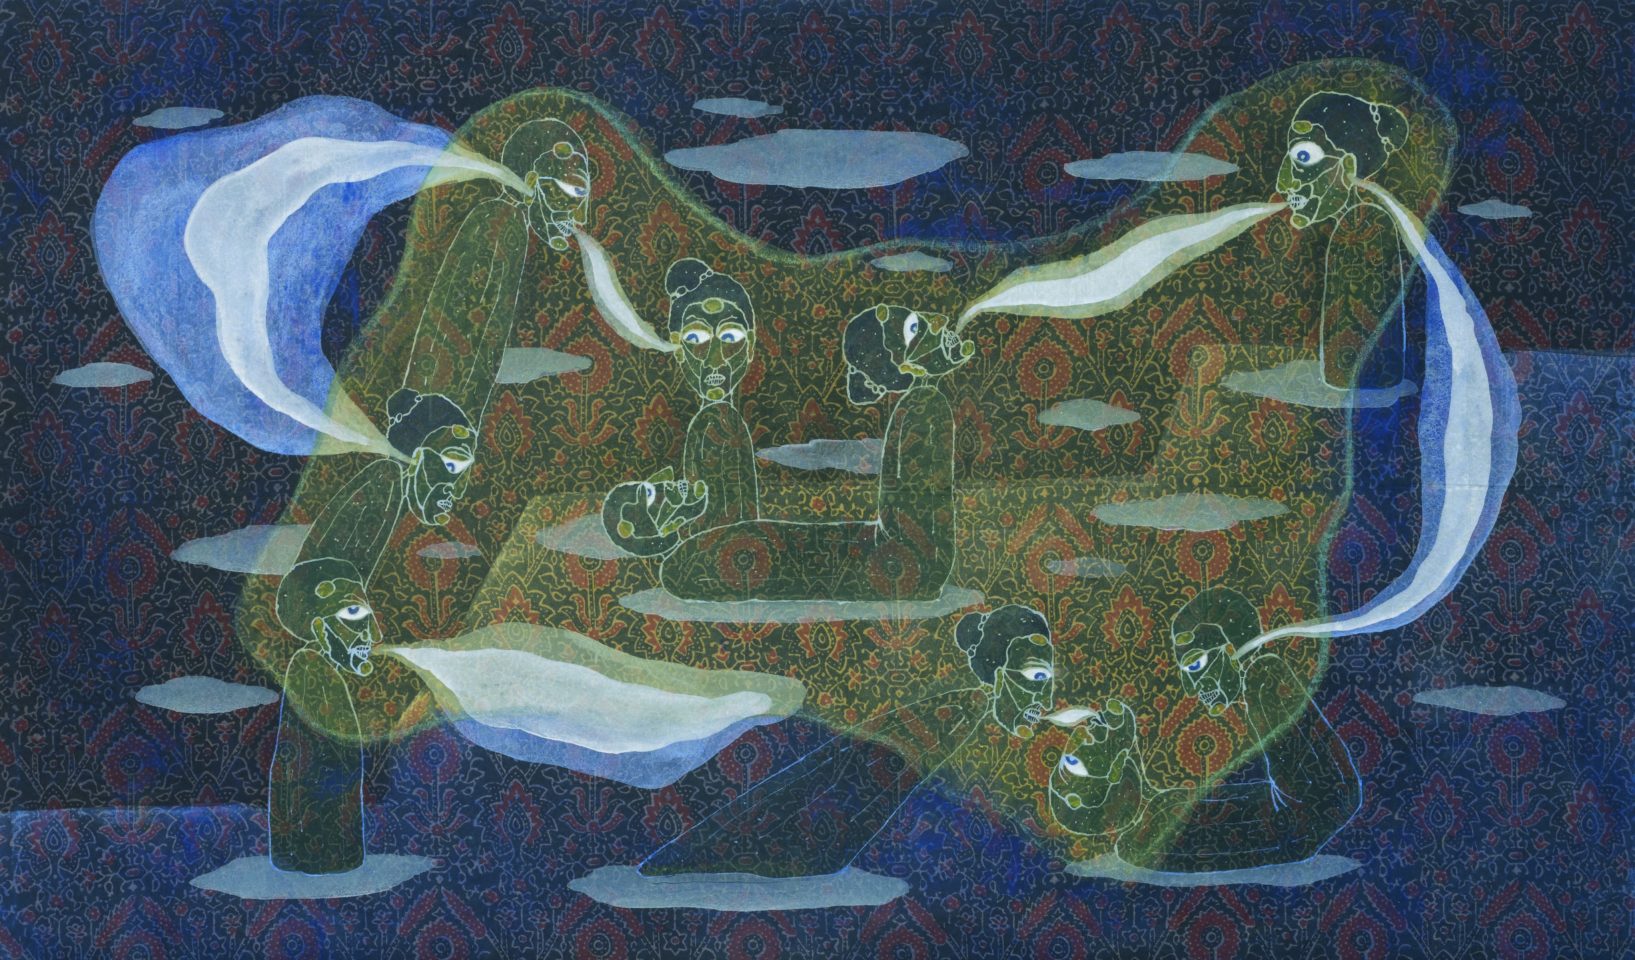 A painting of ten abstract figures on patterned material